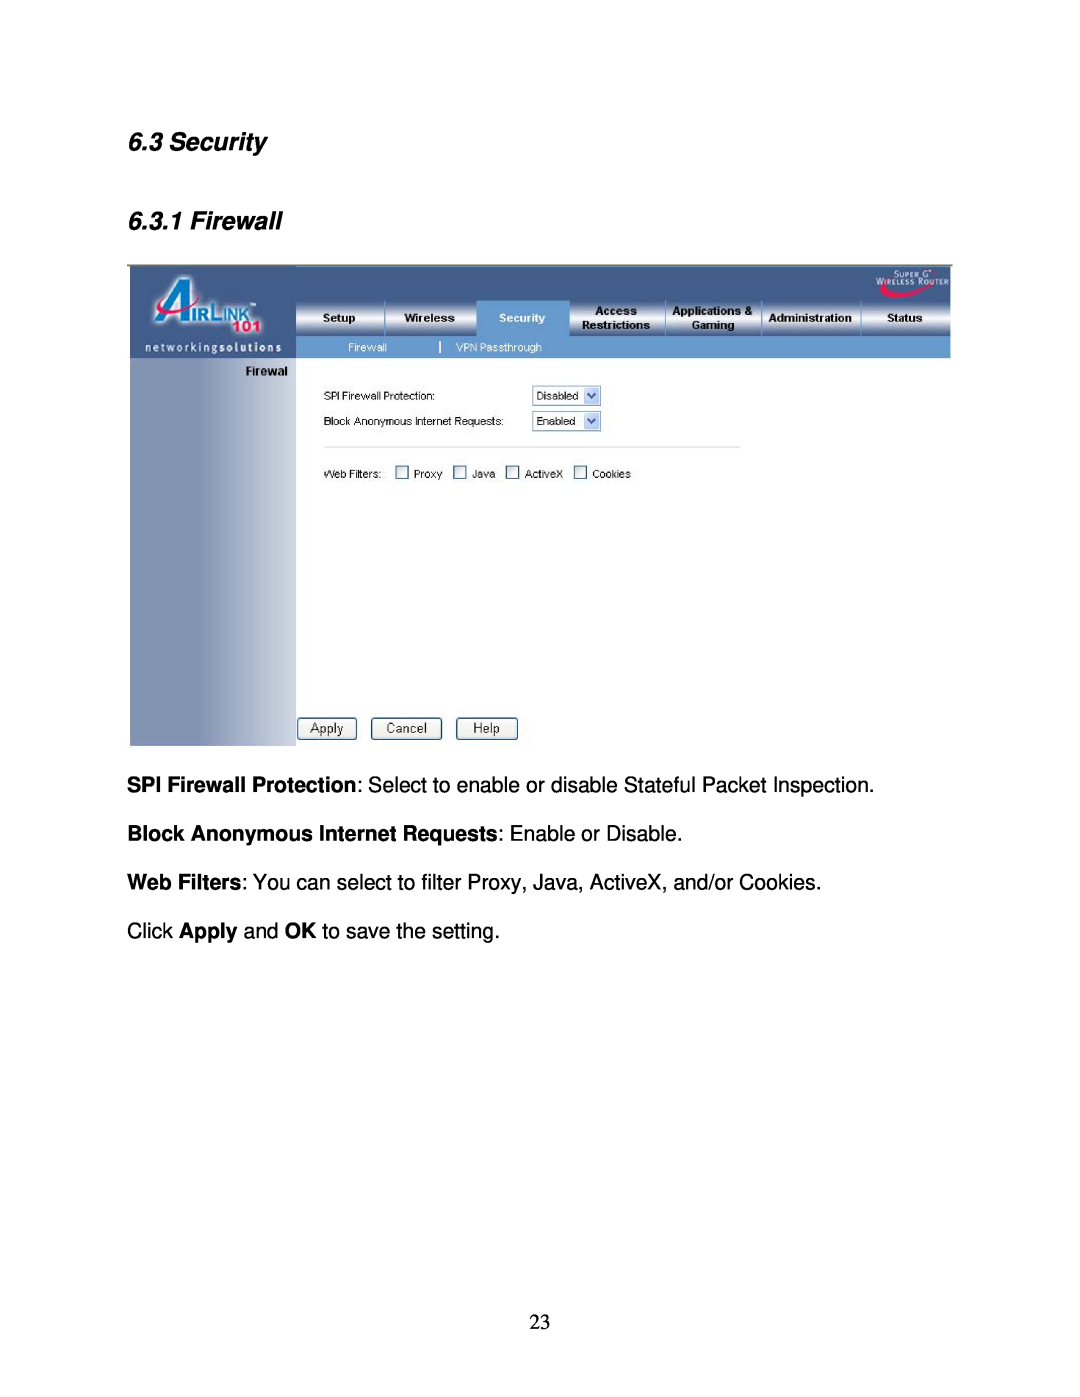 Airlink101 AR420W user manual Security 6.3.1 Firewall, Block Anonymous Internet Requests Enable or Disable 